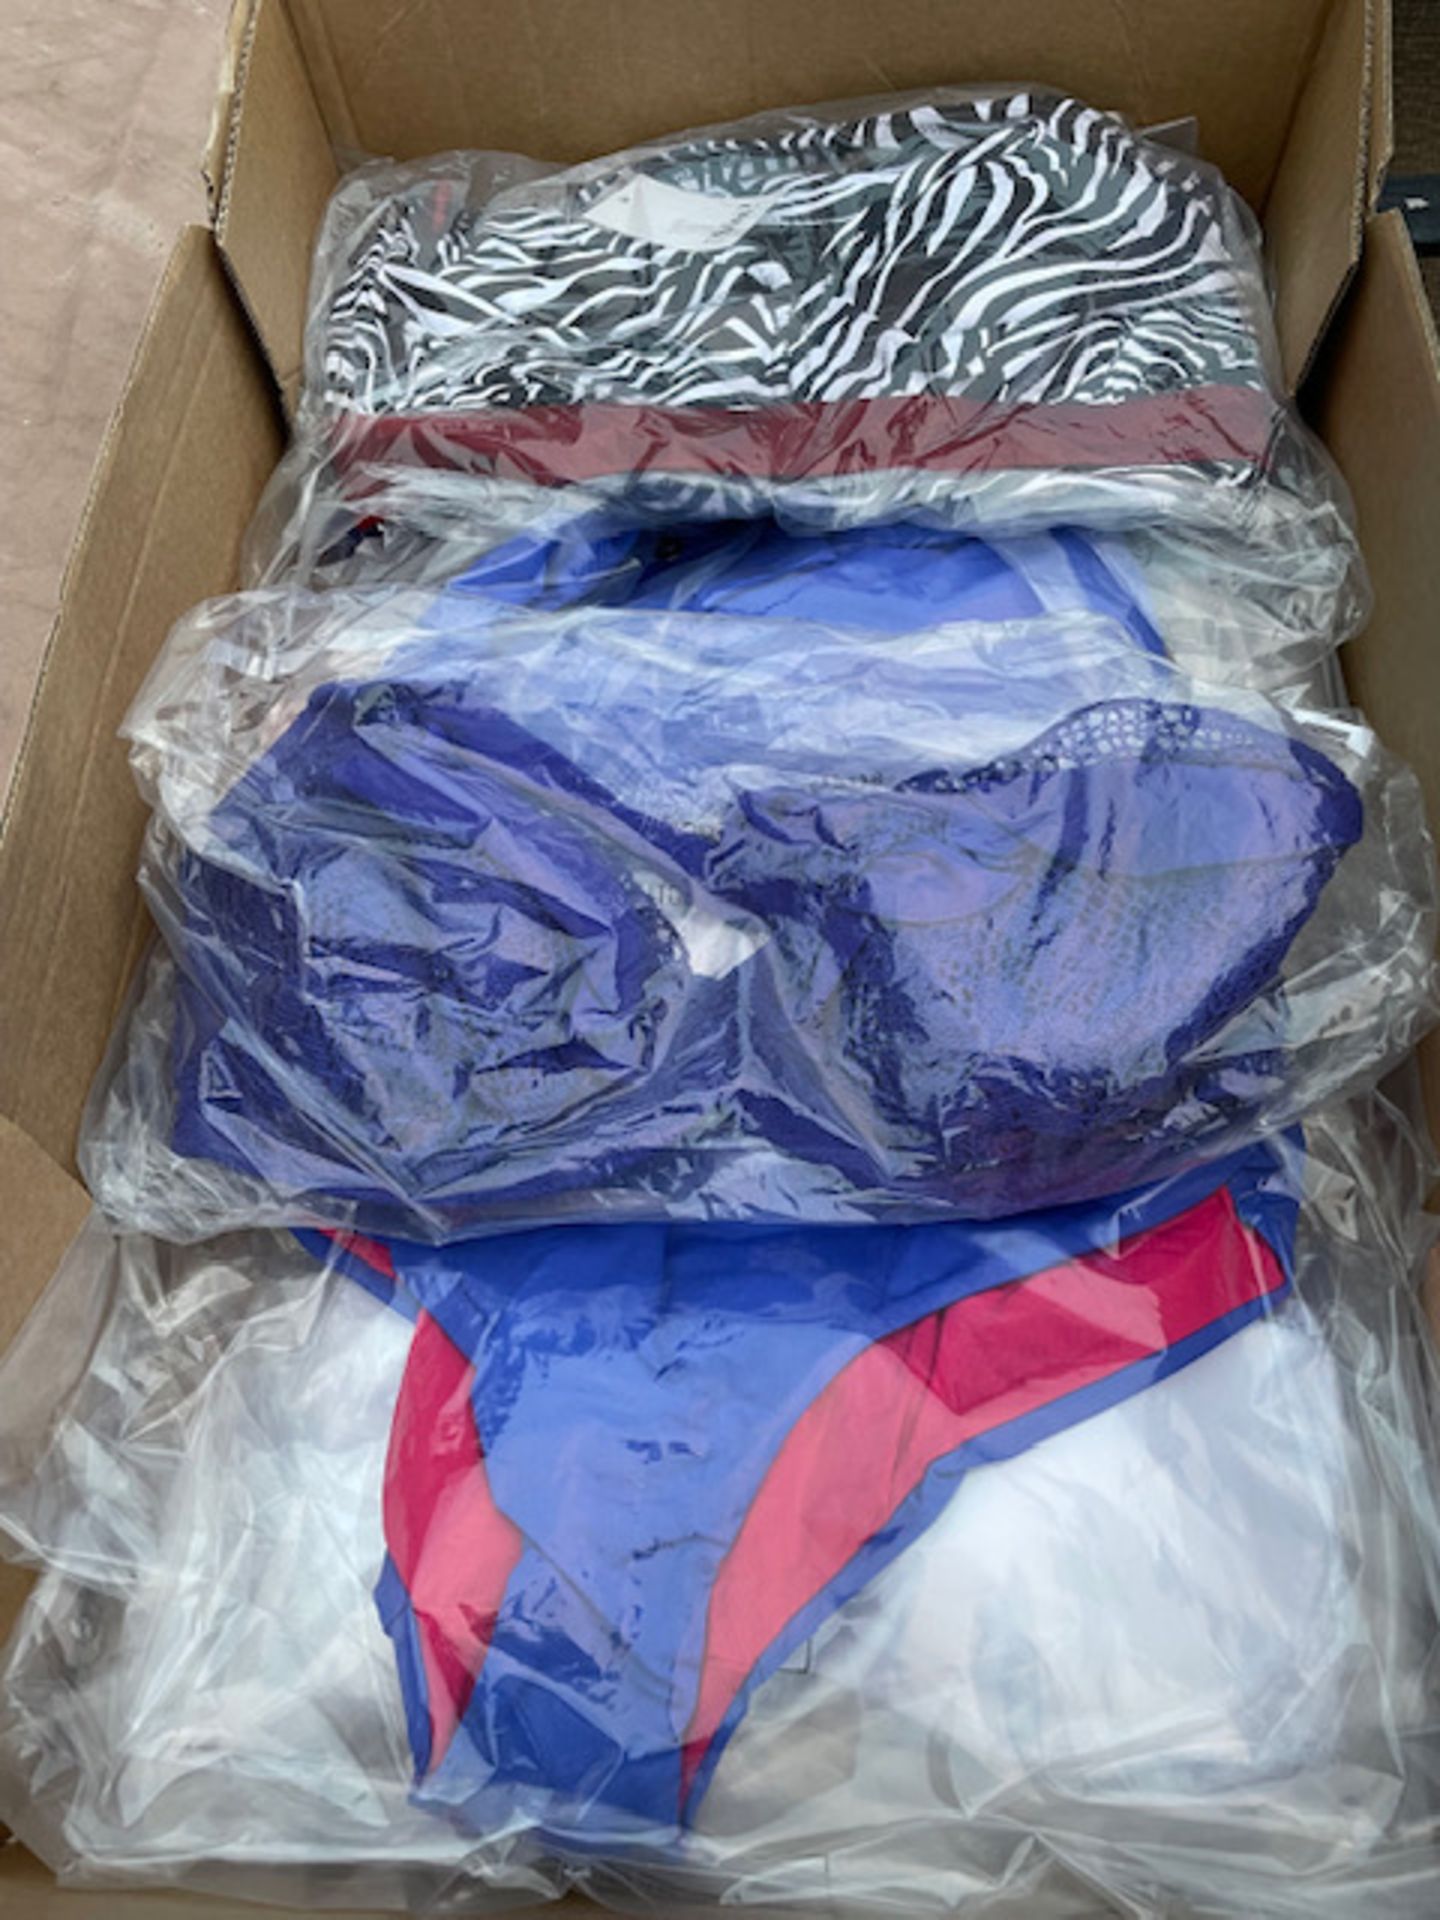 10 PIECE MIXED LINGERIE AND SWIMWEAR LOT IN VARIOUS STYLES AND SIZES INCLUDING FIGLEAVES, POUR MOI